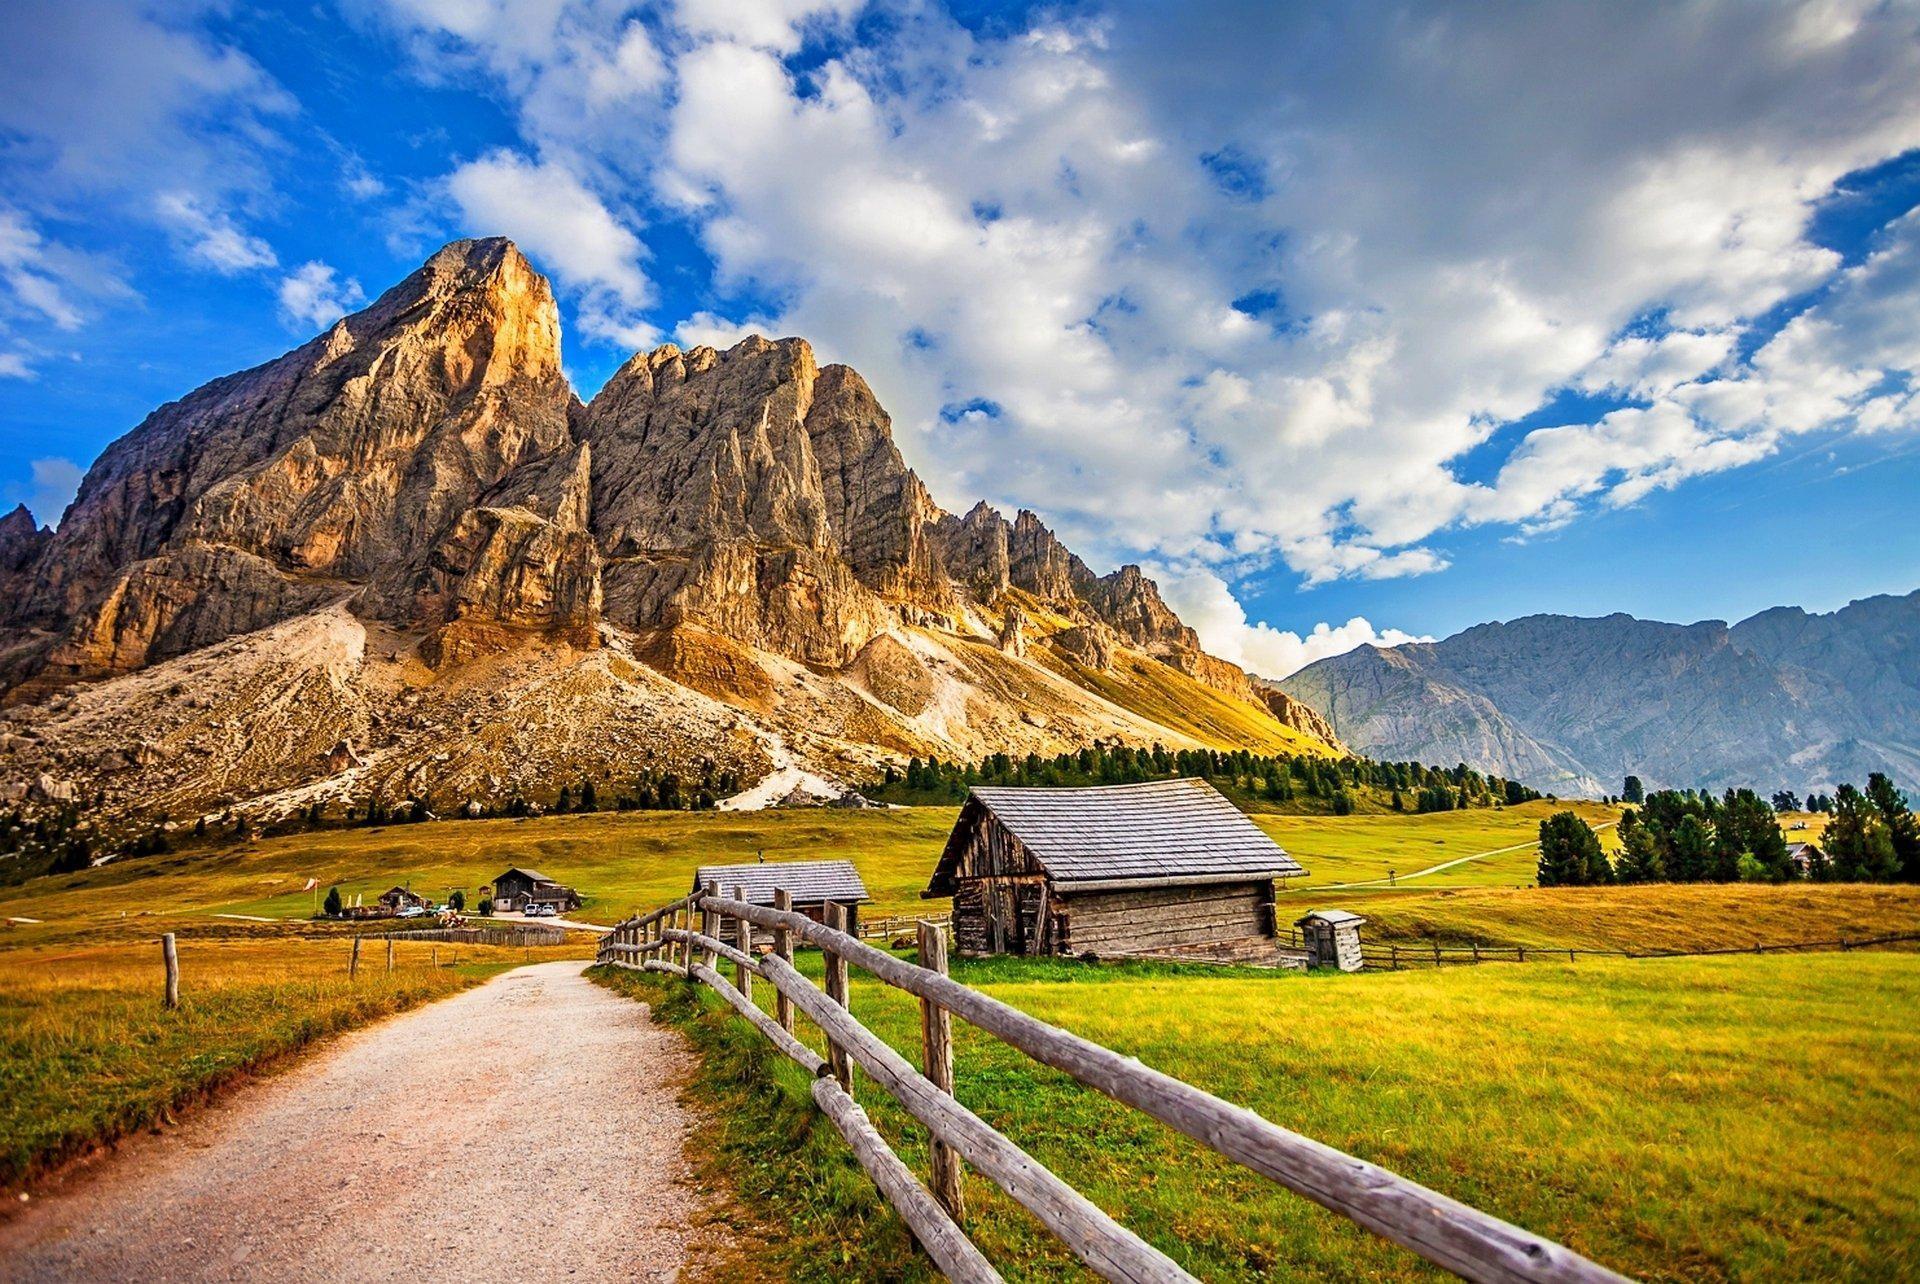 40 Mind-Blowing Mountain Wallpapers for your Desktop Mobile and Tablet - HD